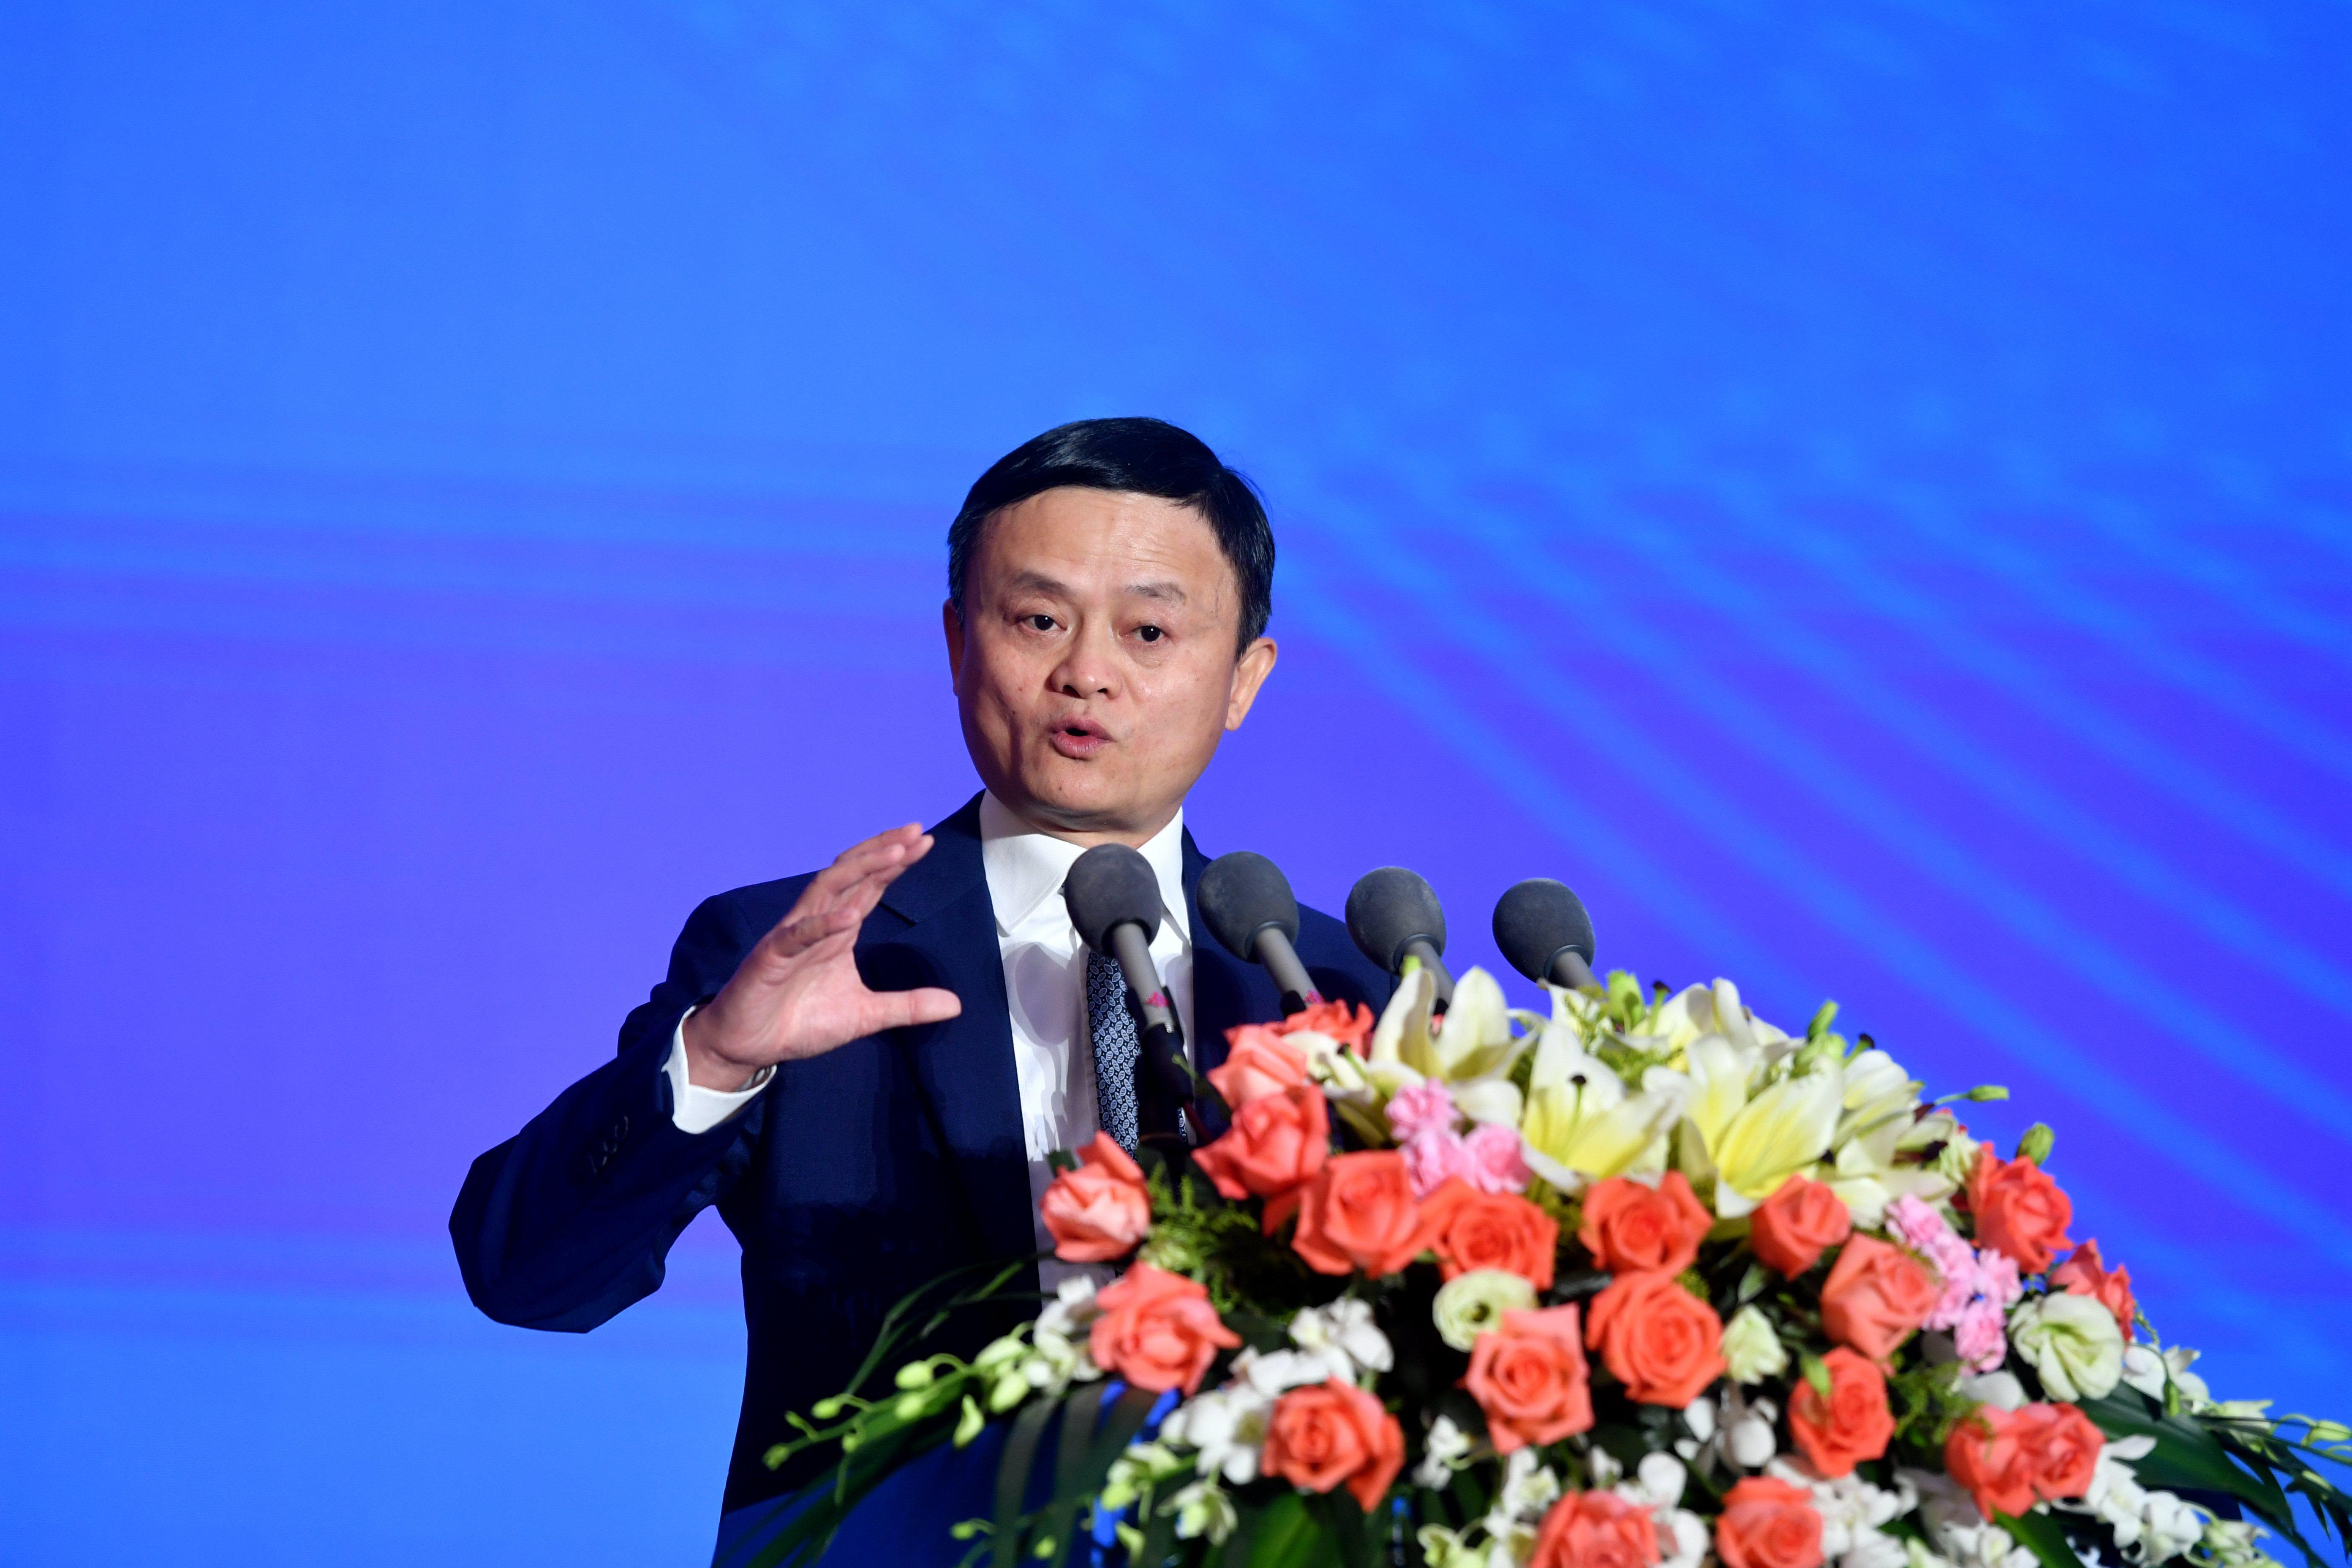 Jack Ma, founder of Alibaba, reappears after a crackdown on his technology empire